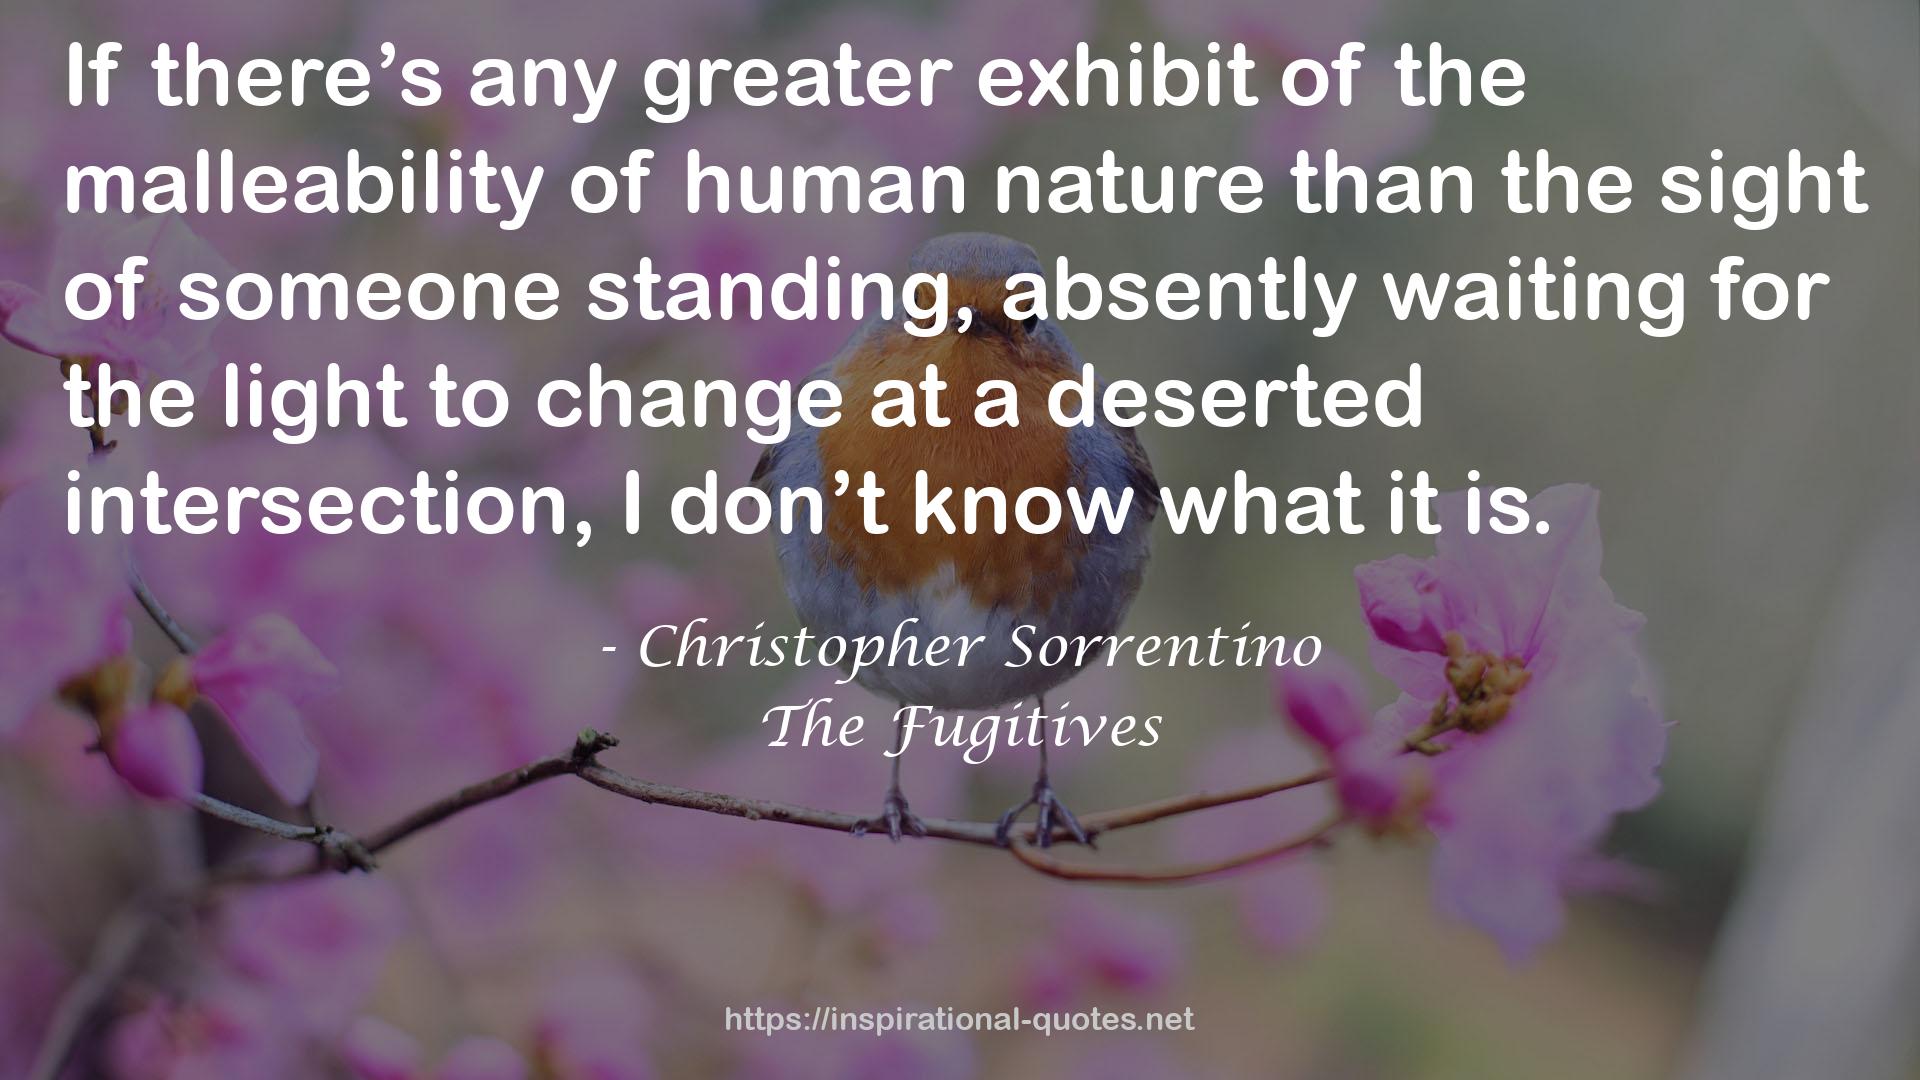 Christopher Sorrentino QUOTES